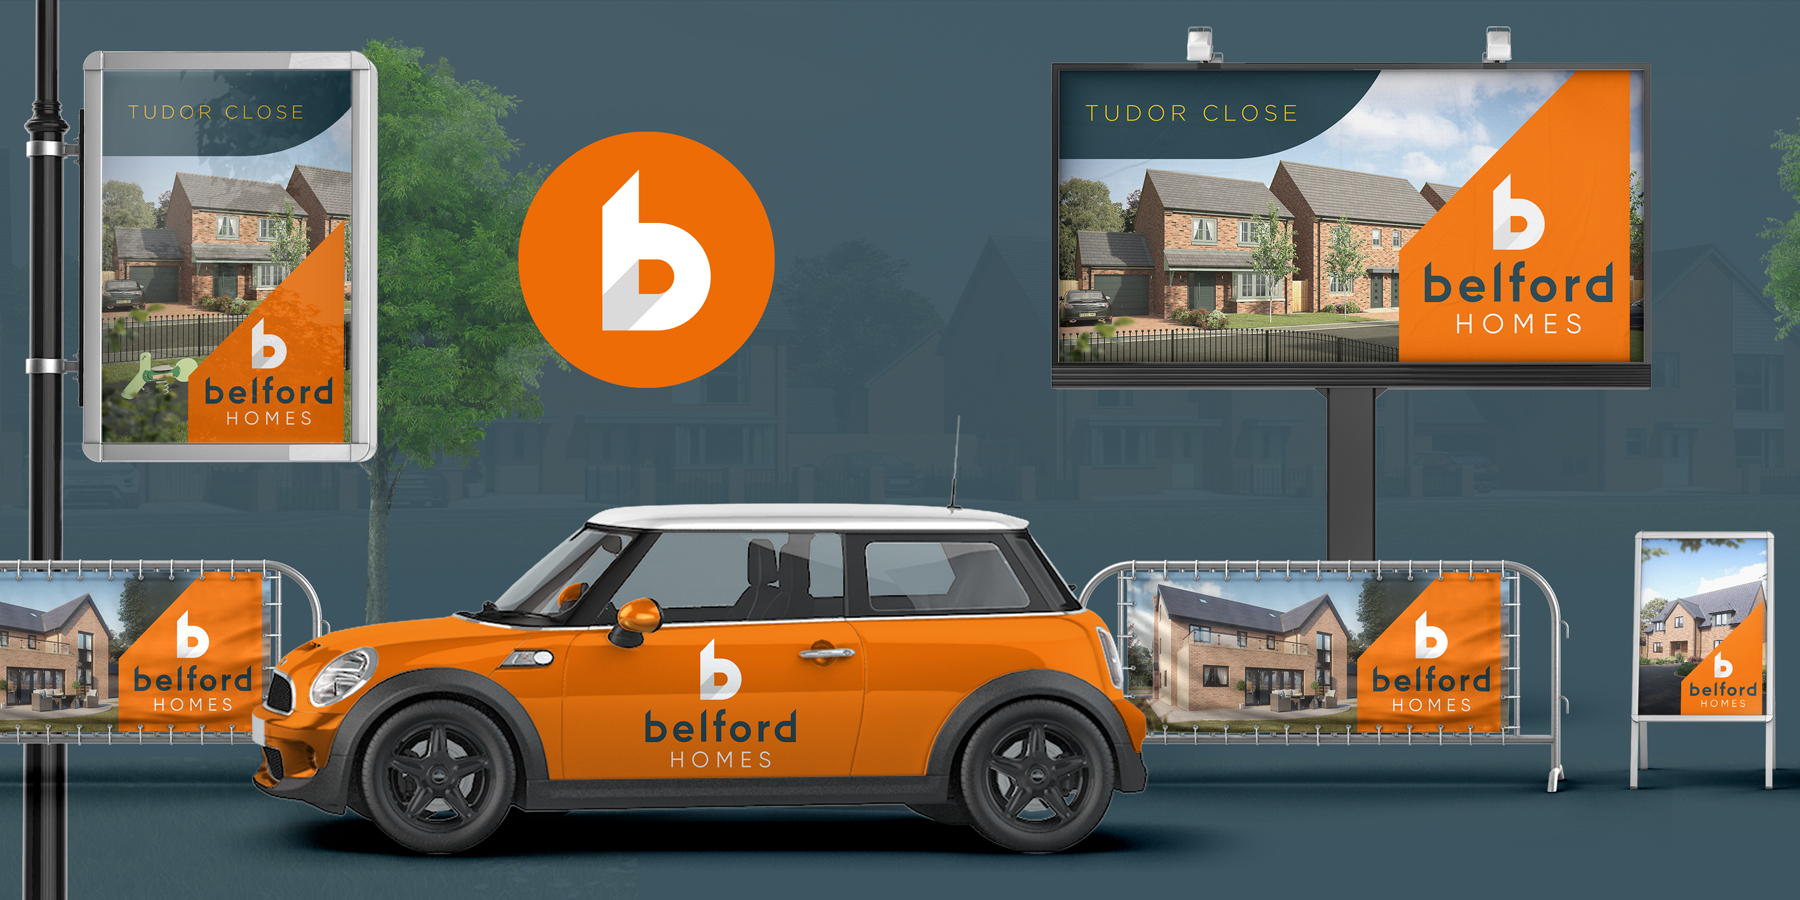 A bespoke new brand and website for Belford Homes